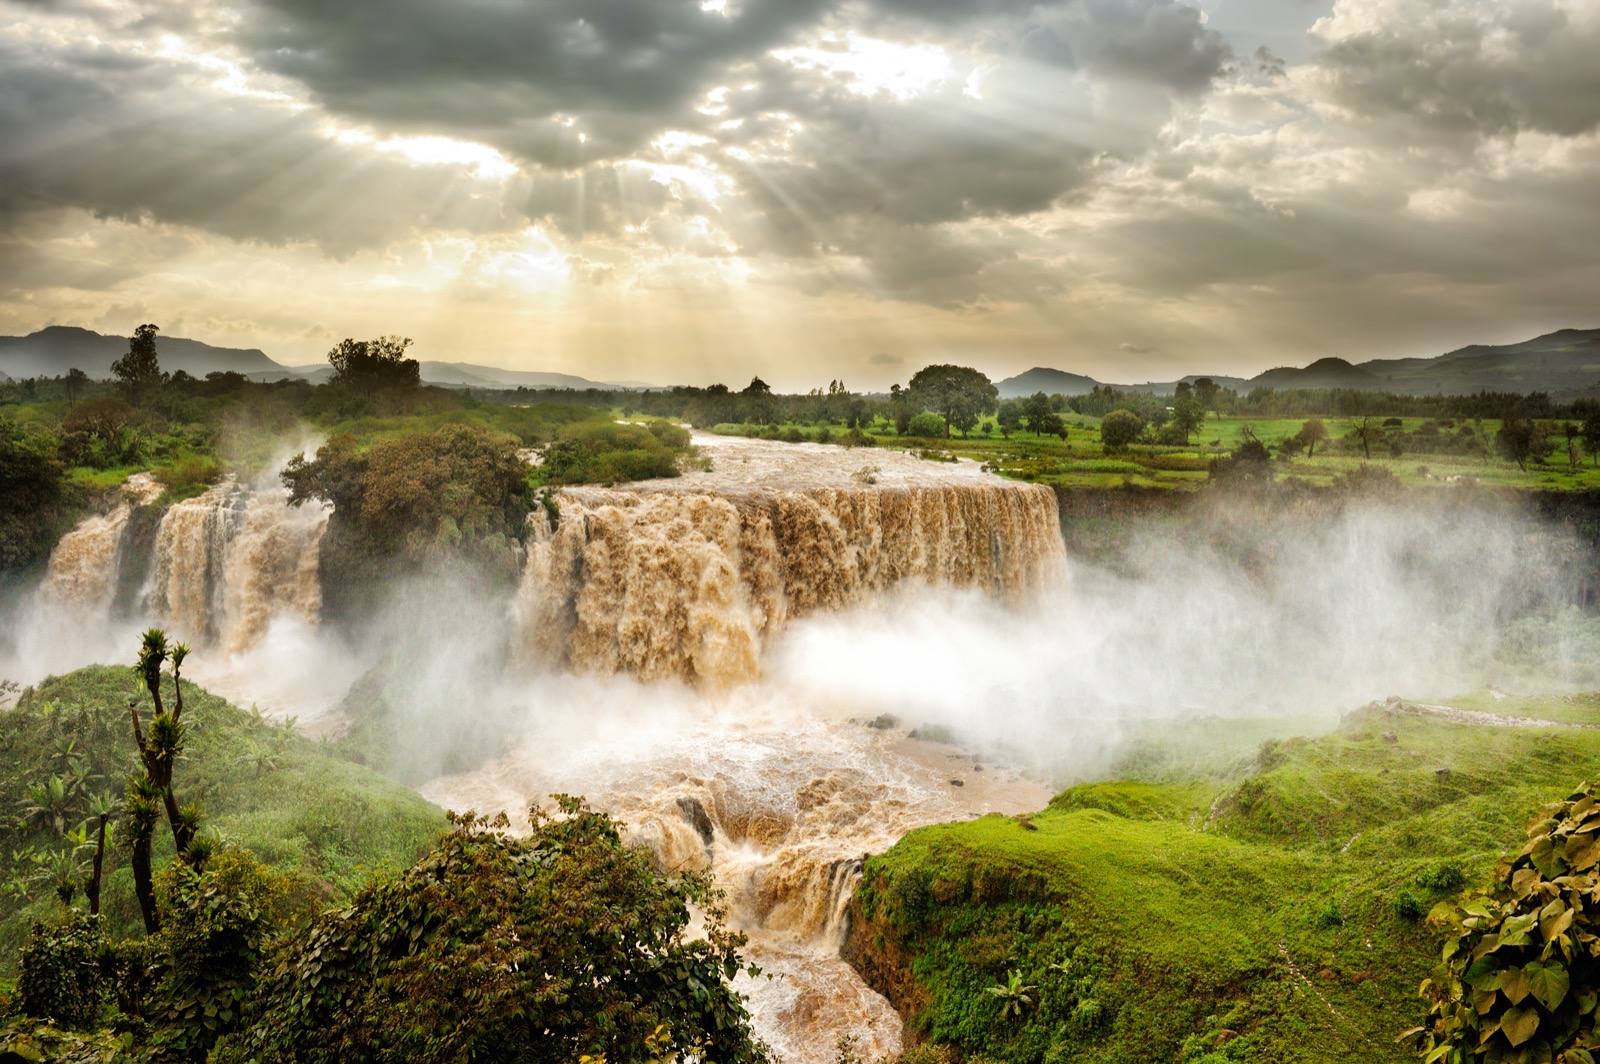 You’ve Got 15 Questions to Prove You Have a Ton of General Knowledge Nile Falls